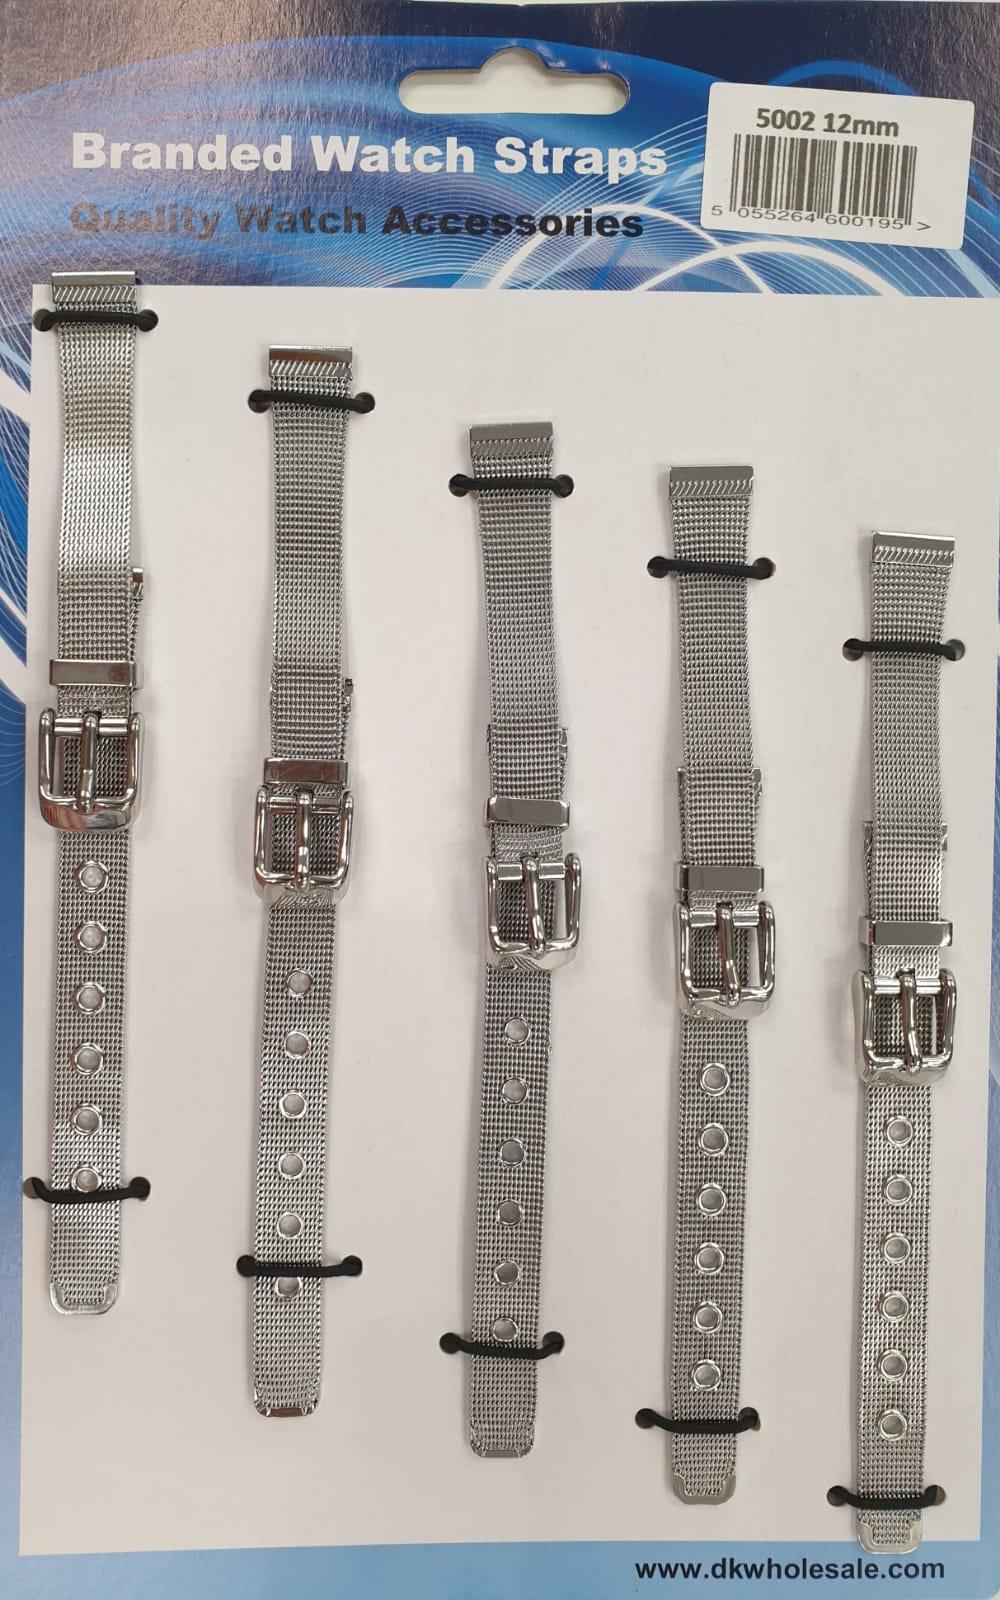 5002 Metal Mesh Watch Straps 5PK Available Sizes 12MM - 18mm